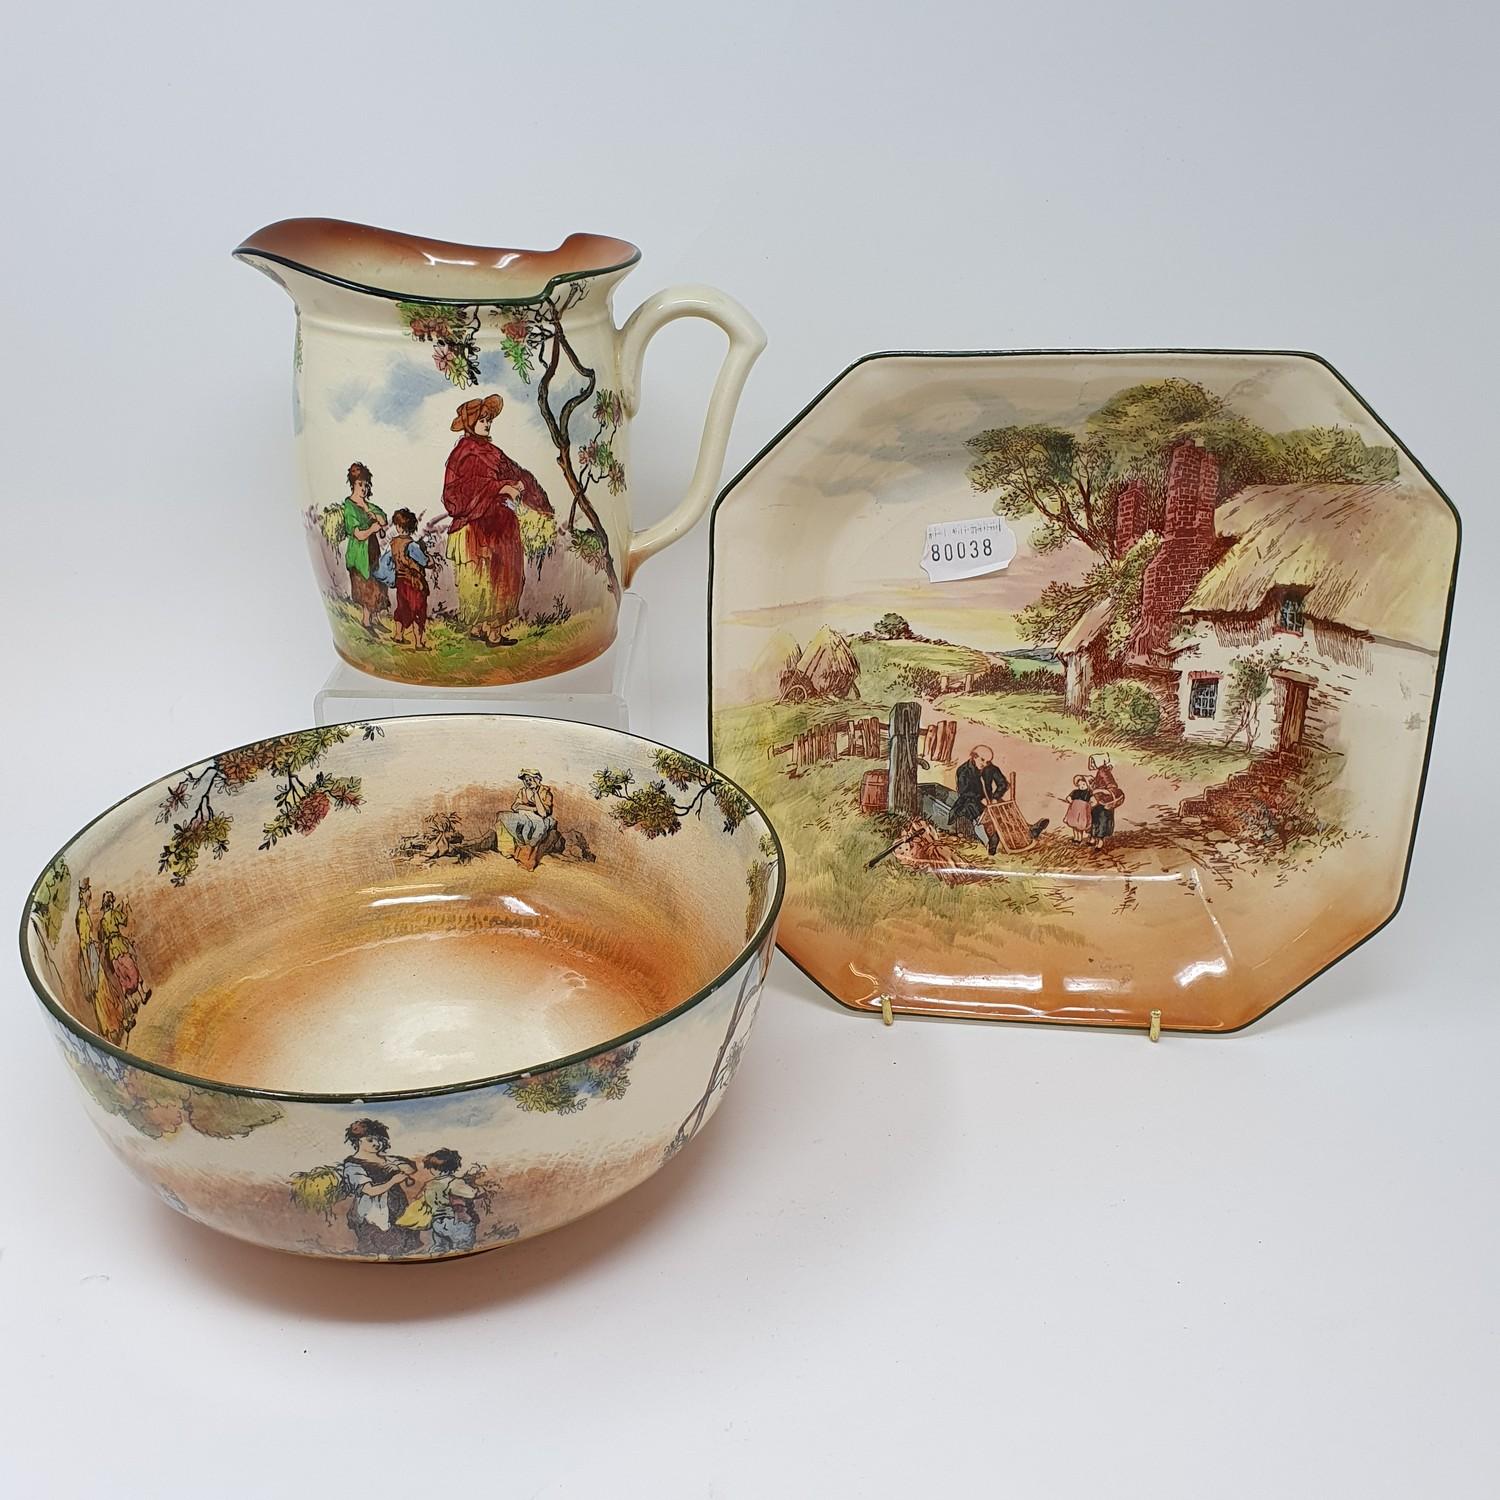 A pair of Royal Doulton Series ware vases, and various other Series ware (box) - Image 6 of 7